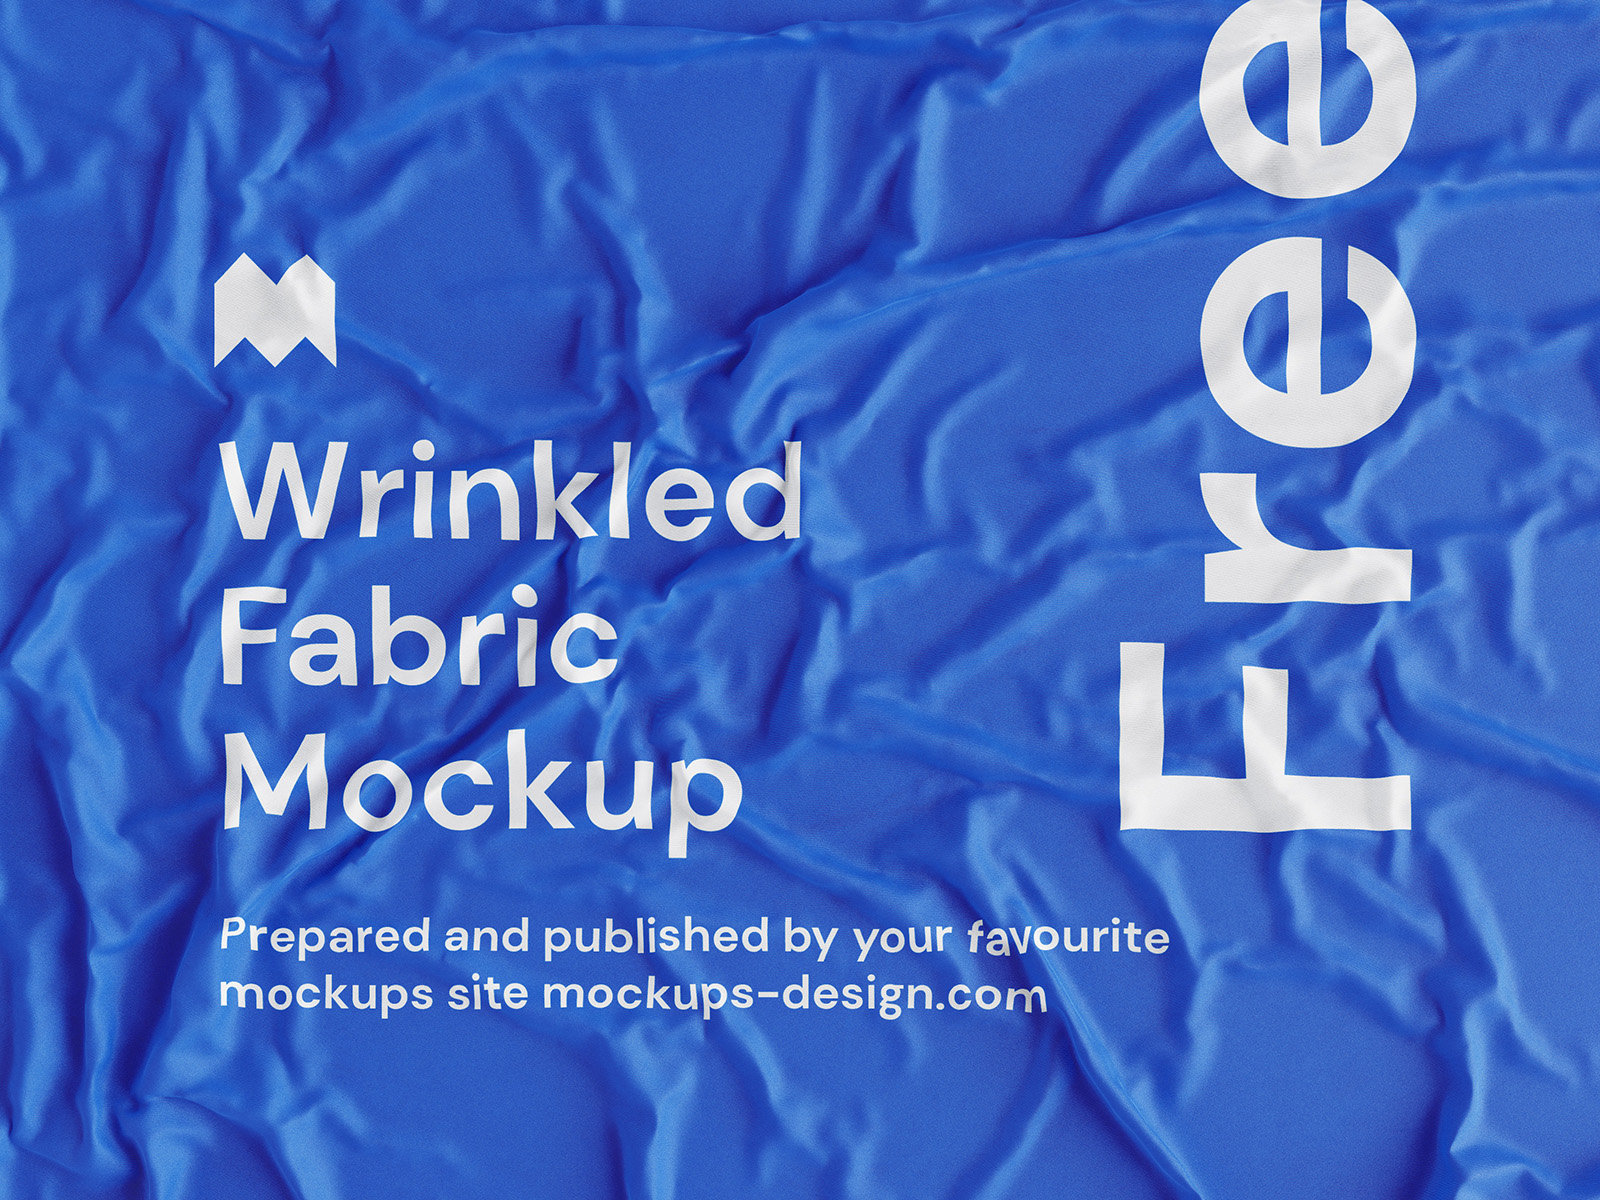 4 Wrinkled Fabric Mockups in Close-up Sight FREE PSD